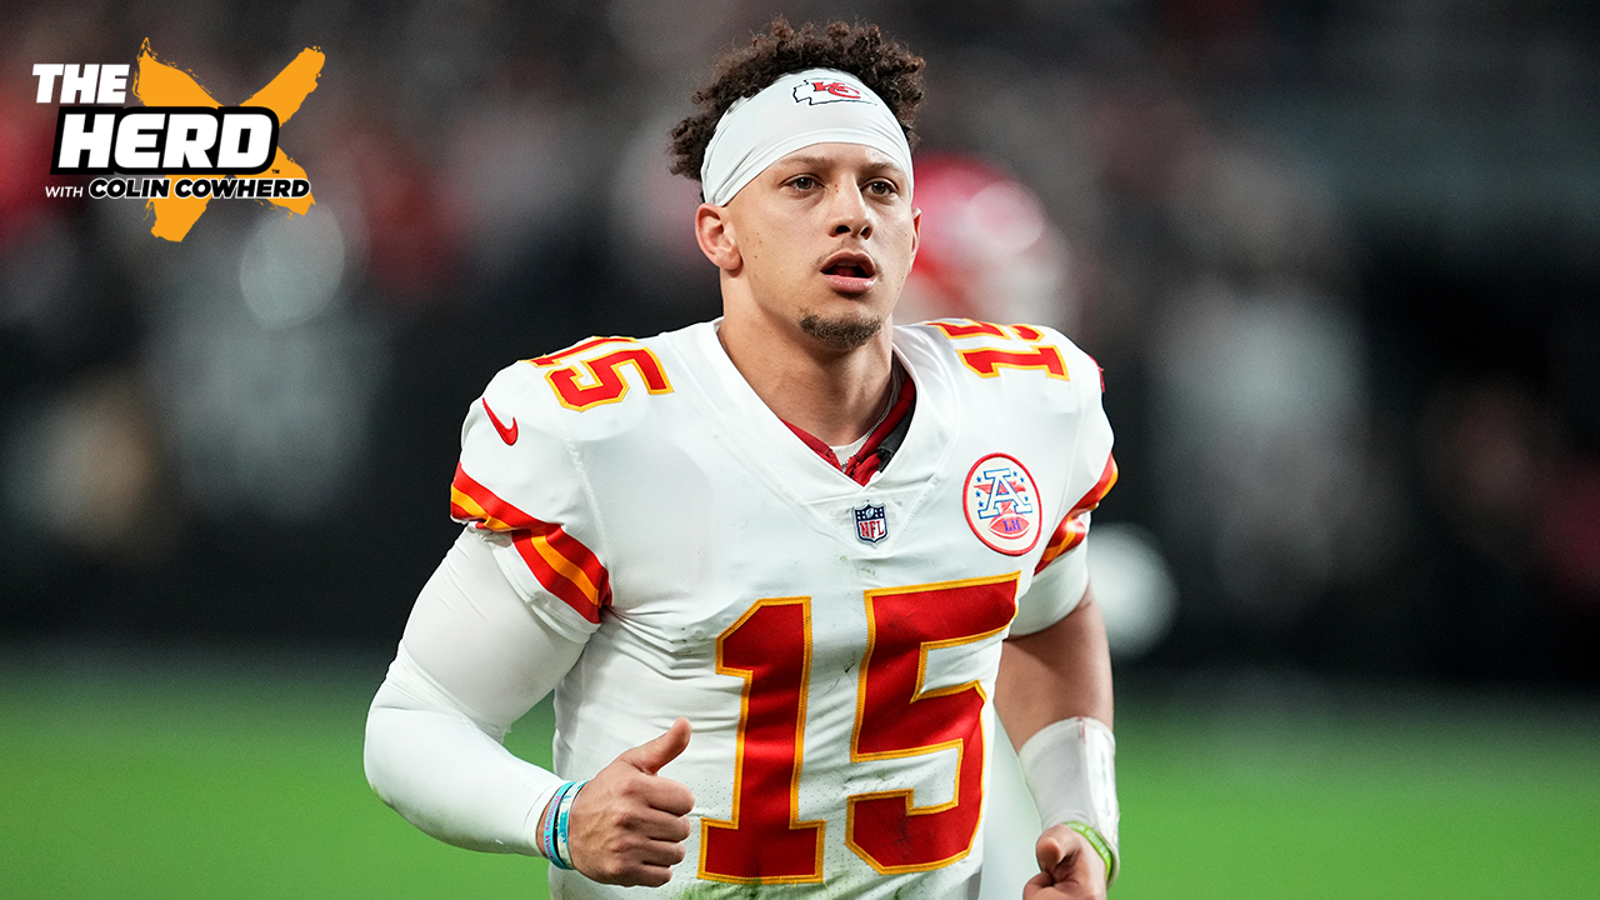 Is Mahomes the clear favorite for the NFL MVP?